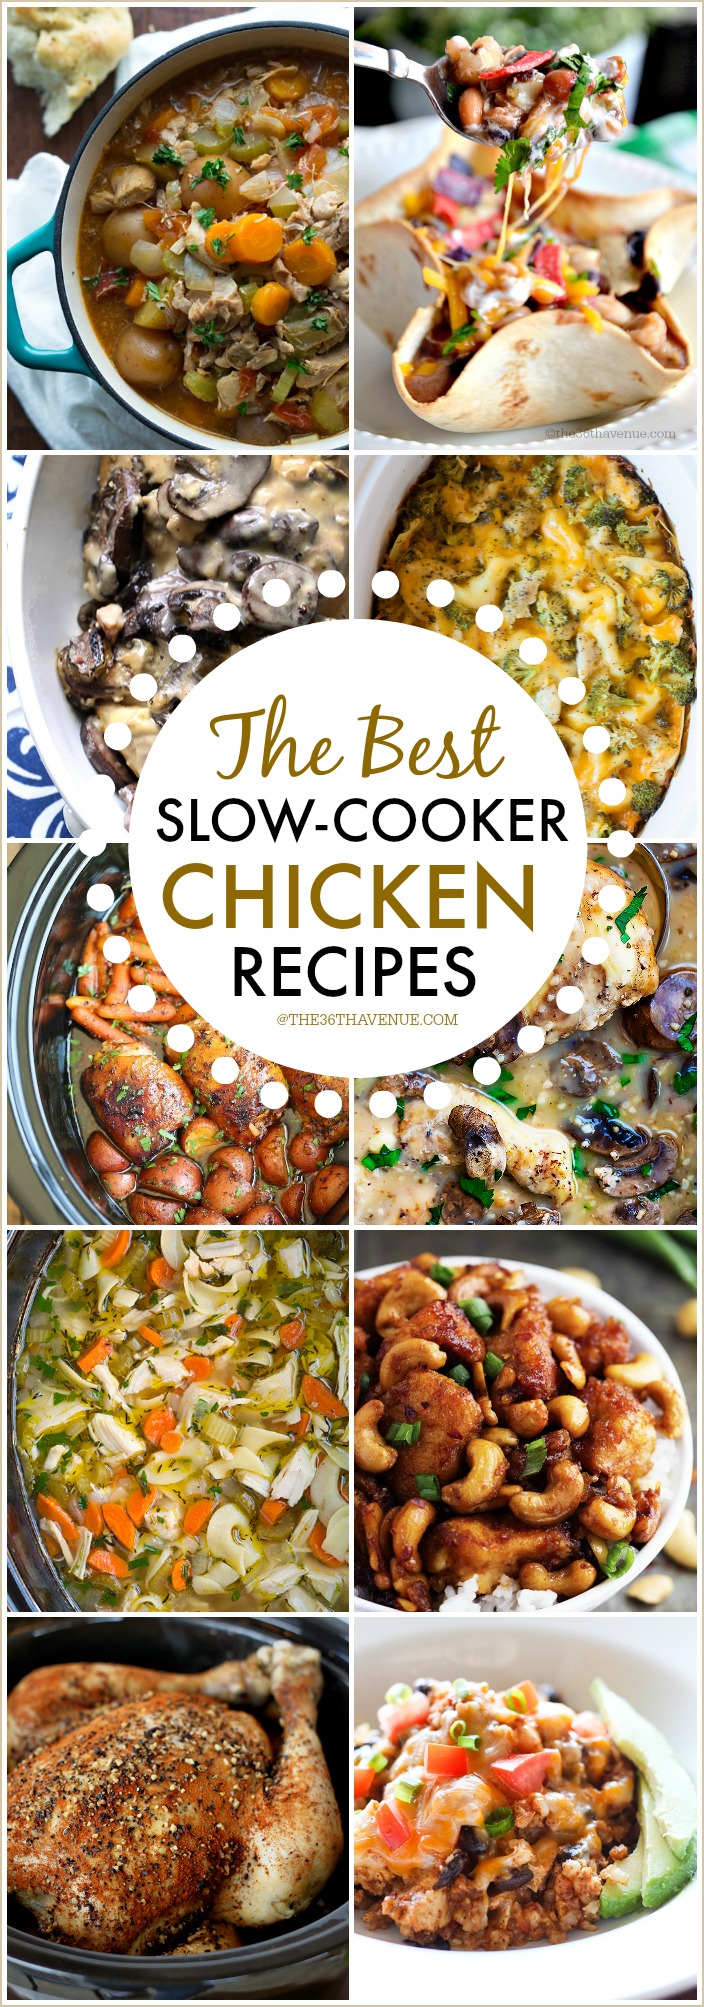 Slow Cooker Chicken Recipes at the36thavenue.com